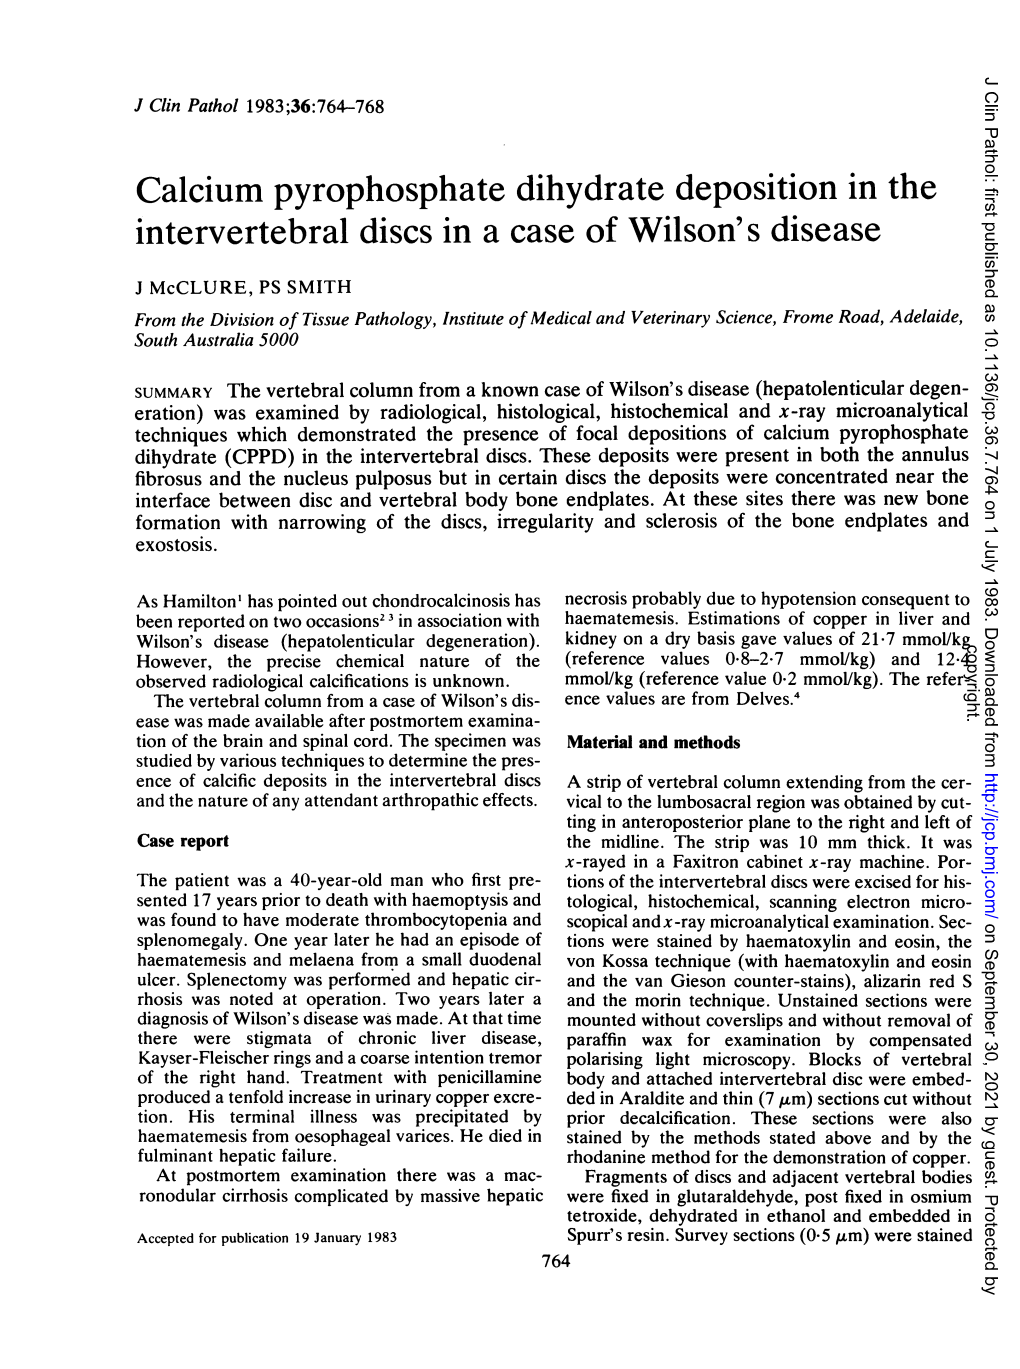 Calcium Pyrophosphate Dihydrate Deposition in the Intervertebral Discs in a Case of Wilson's Disease